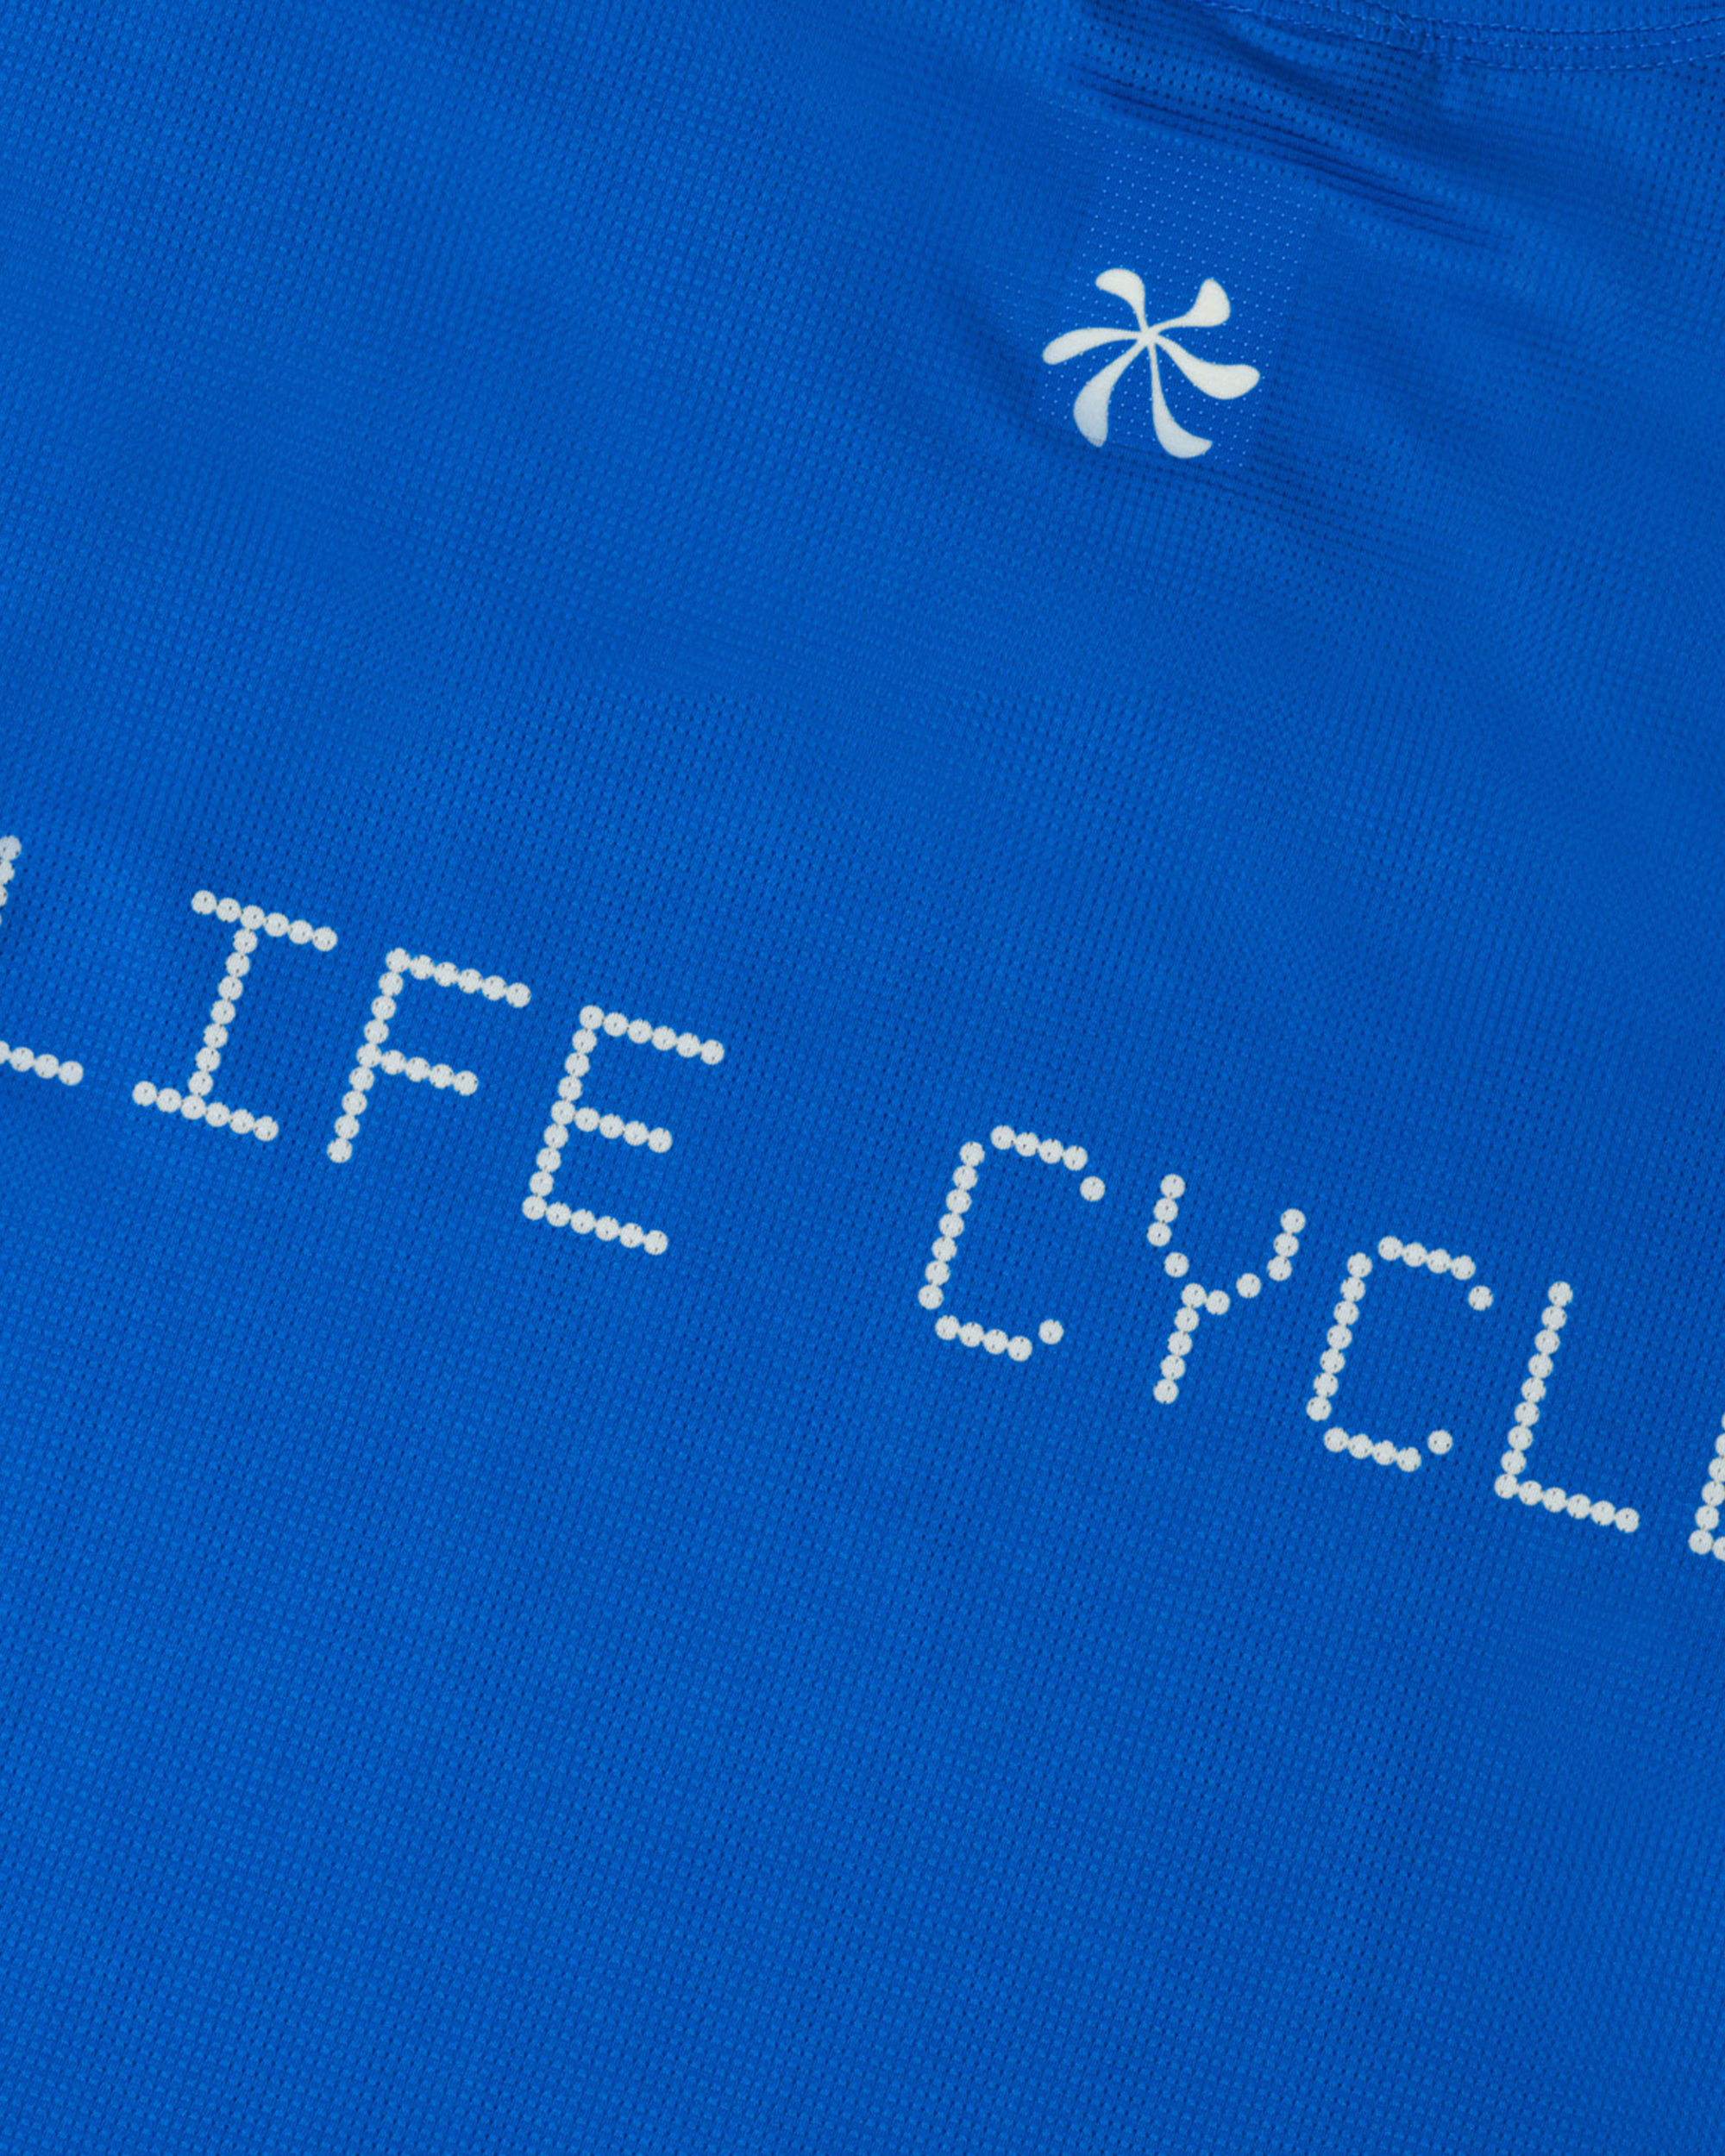 Nomadic Tech S/S T Shirt Jersey - Life Cycle Blue